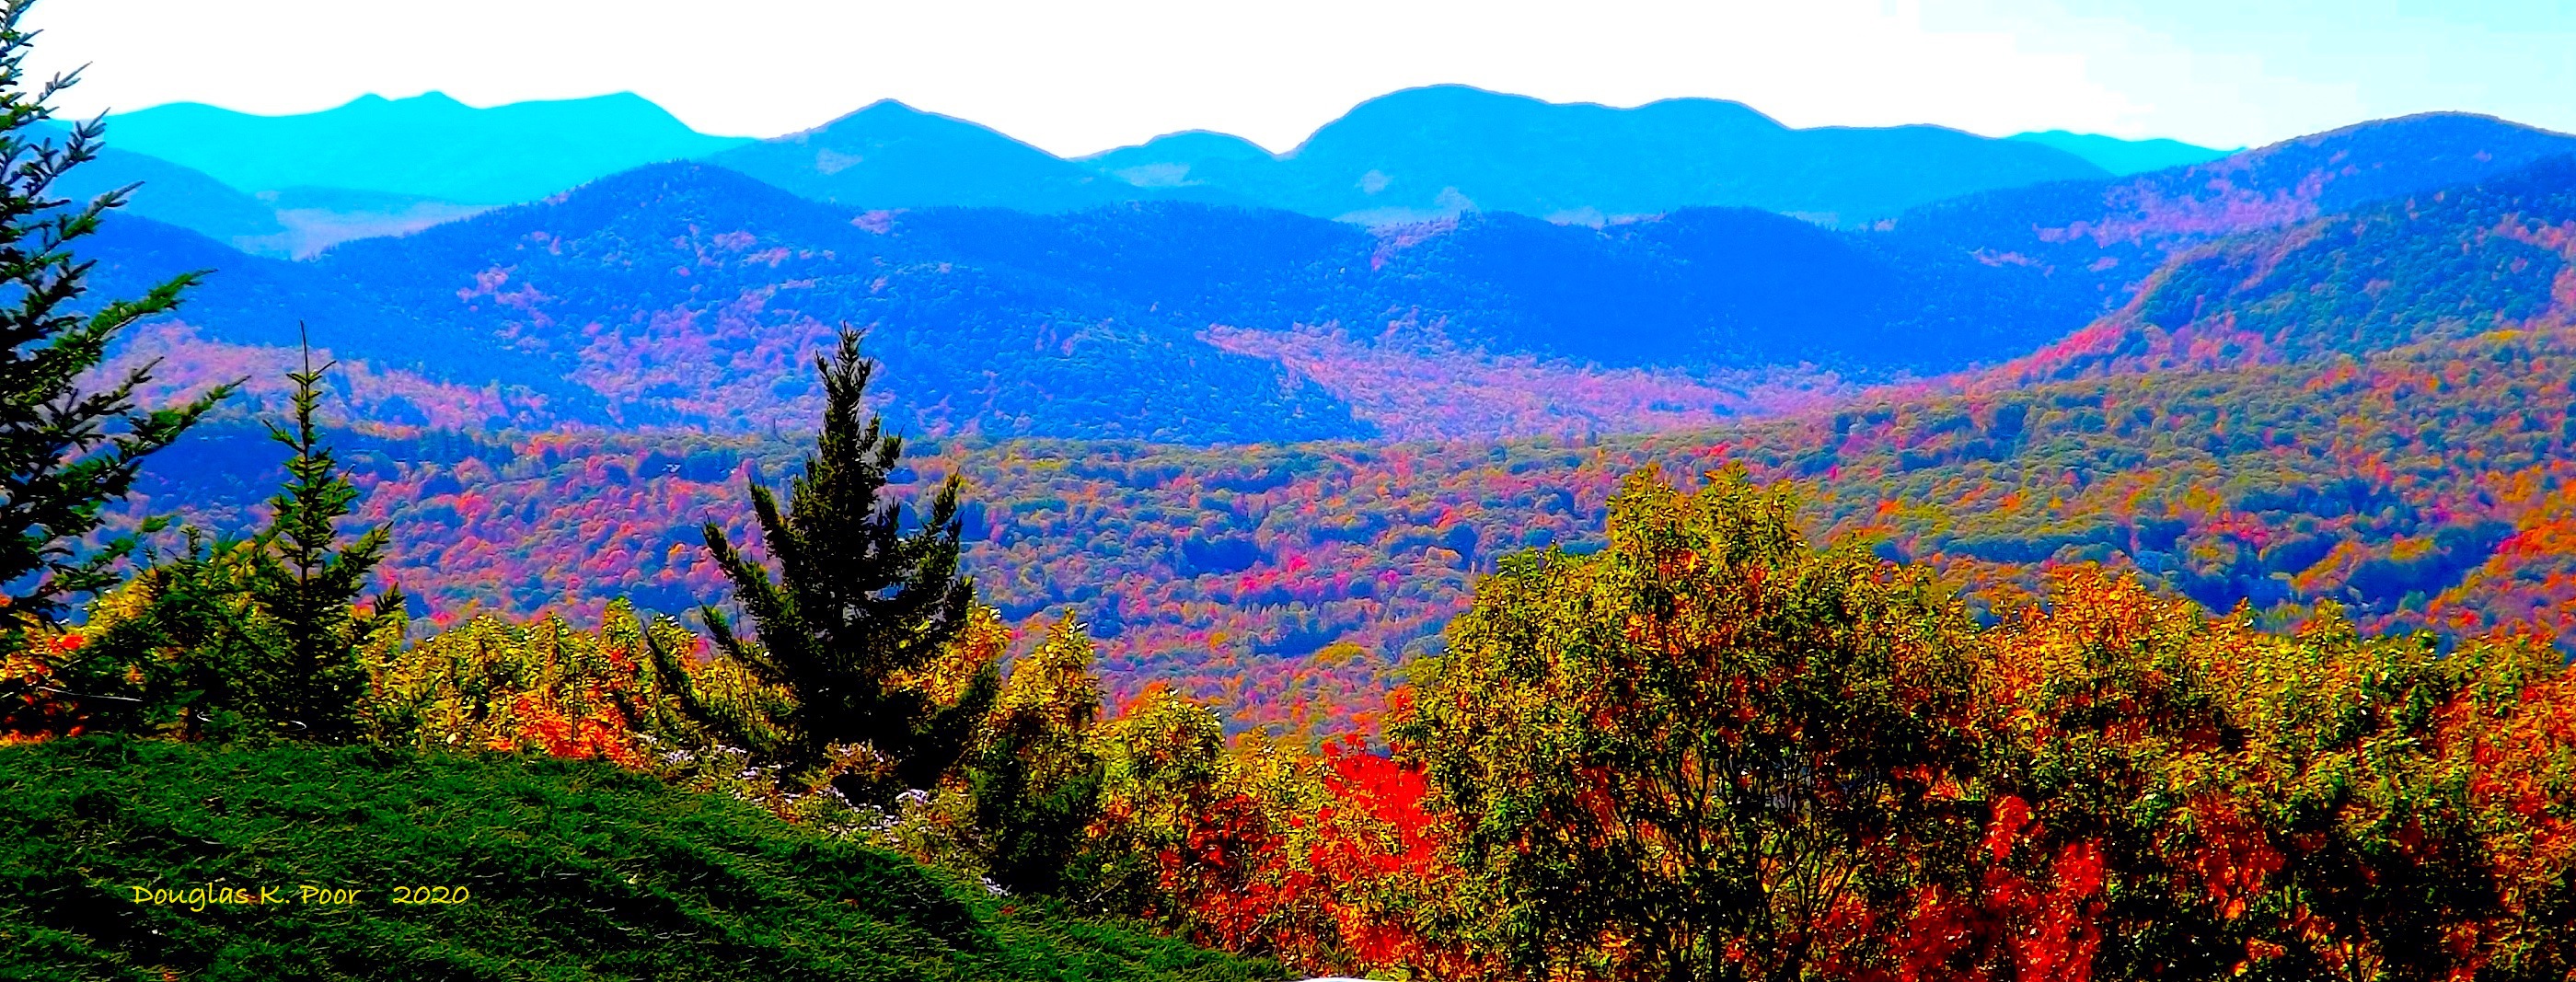 ================---MTNS-AND-FOLIAGE.=================================================================================================================================================---MTNS-AND-FOLIAGE.